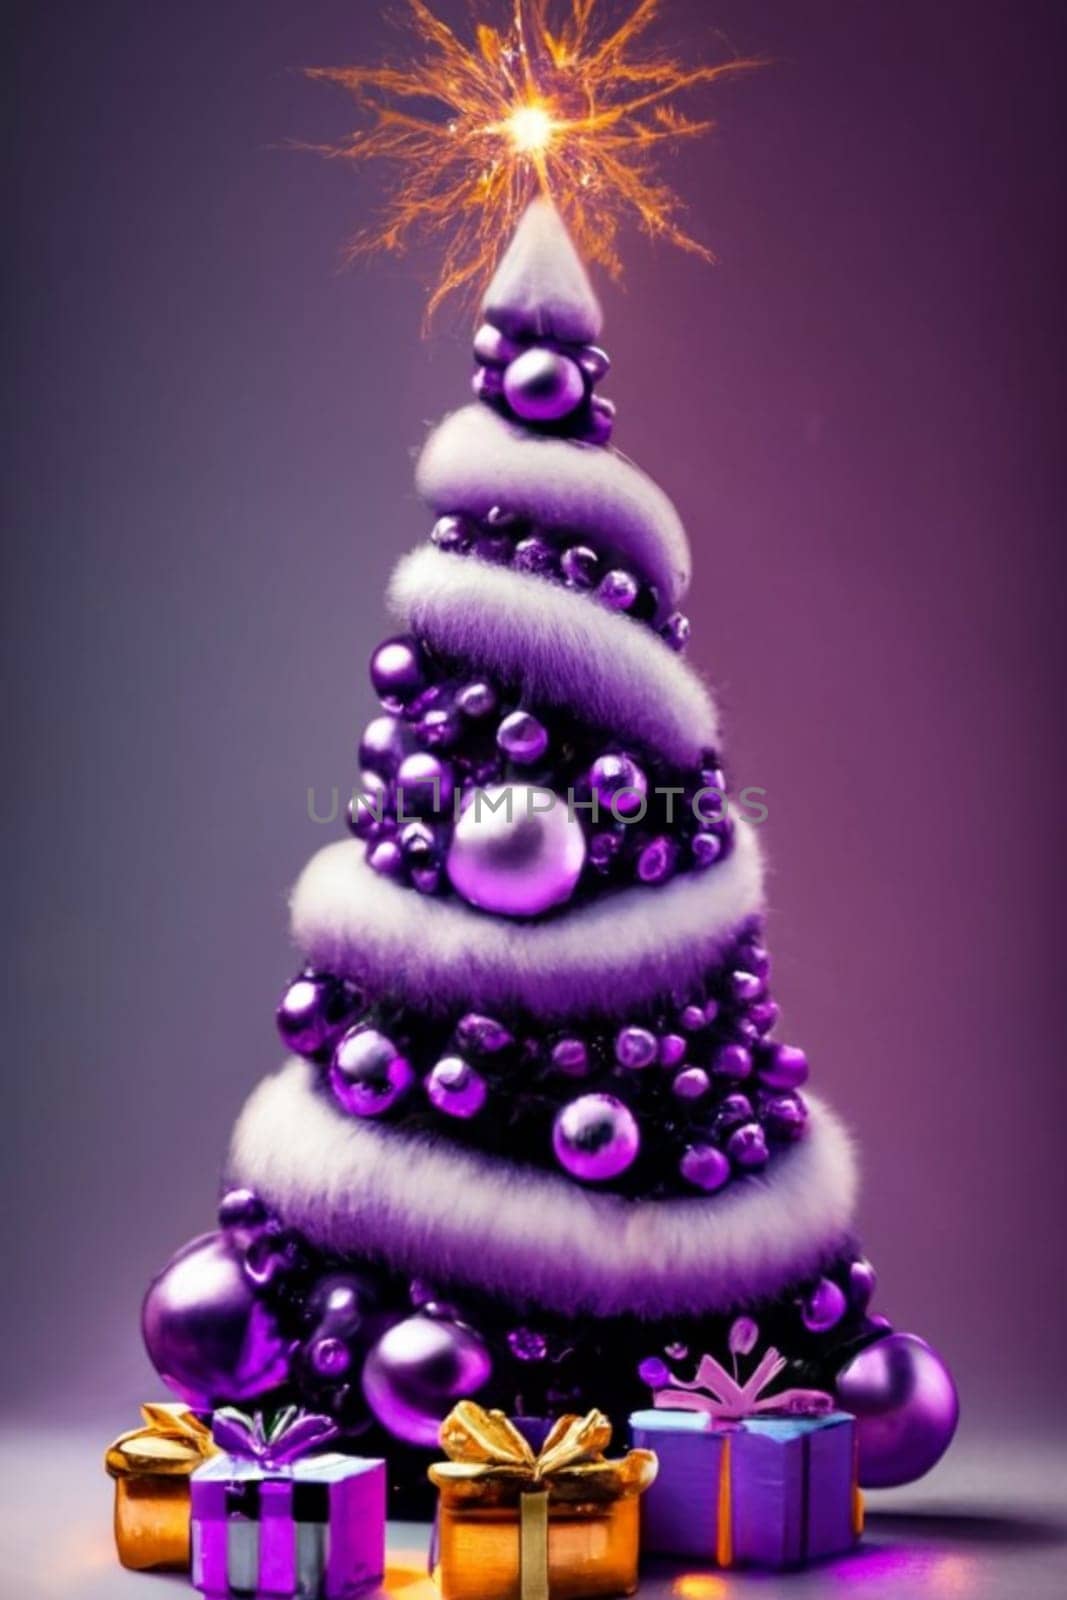 purple christmas tree with ornaments for religious celebration on violet gradient background by verbano